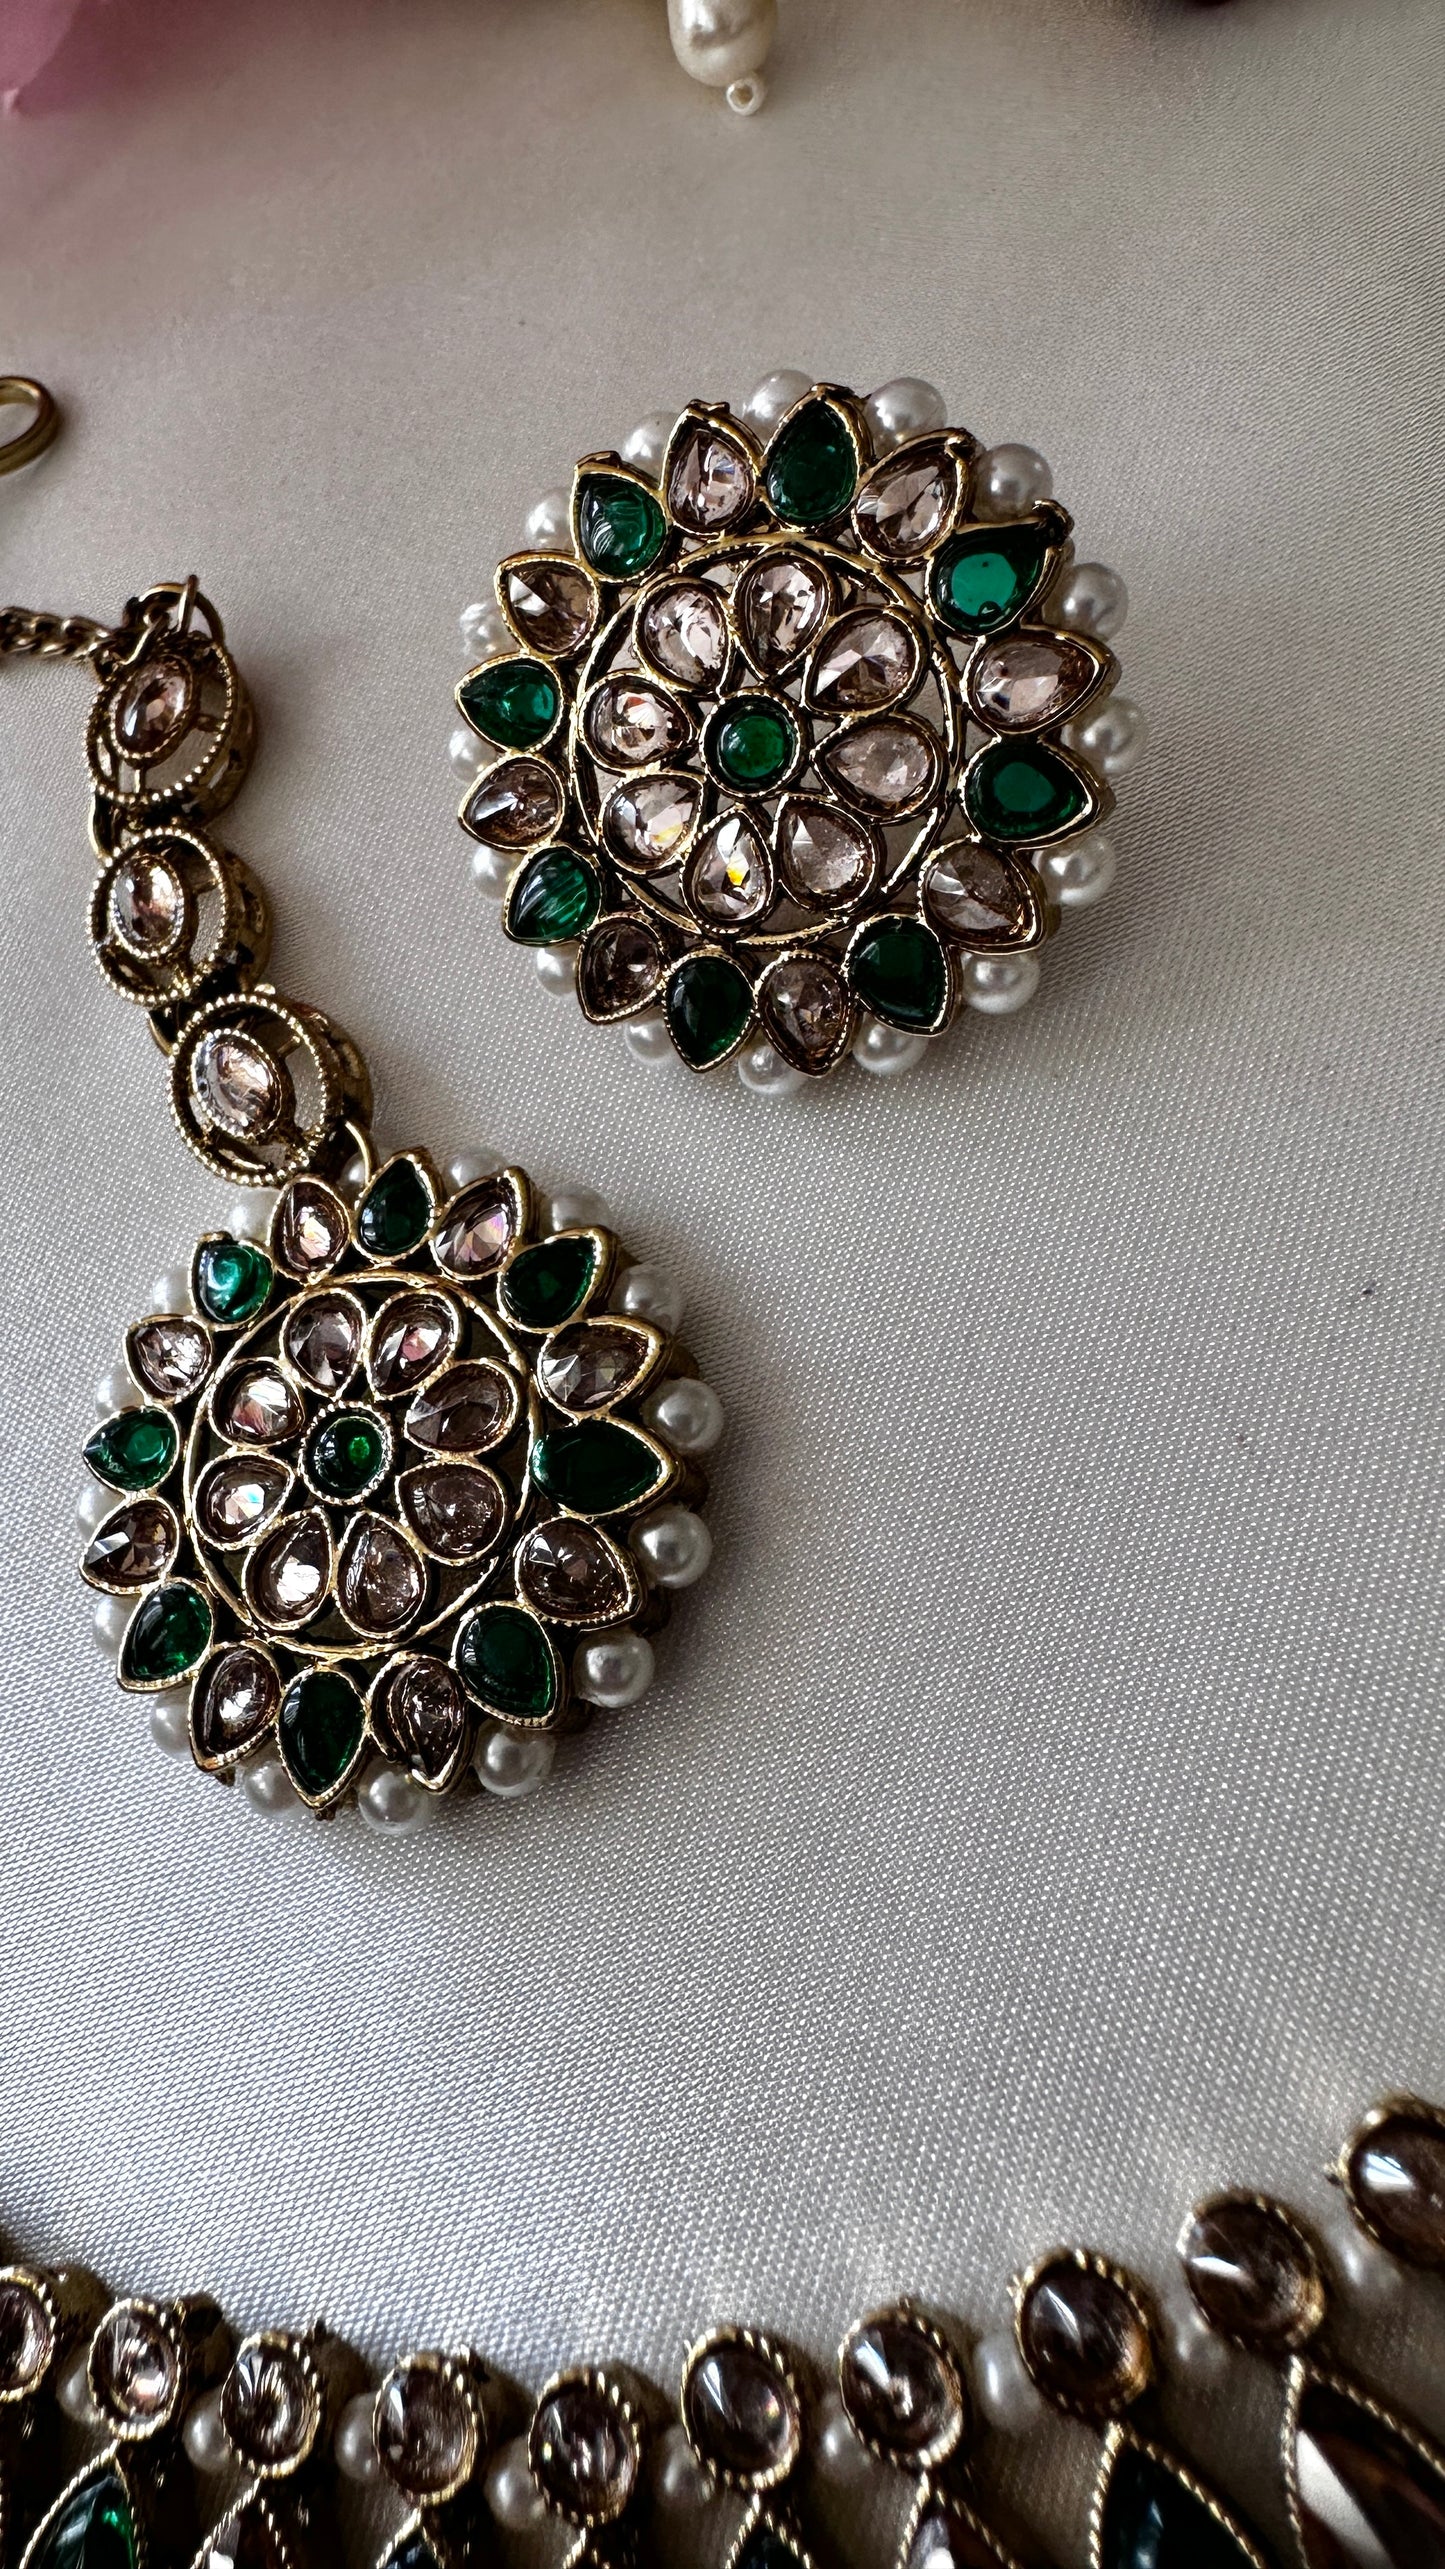 Polki necklace with studs and tikka